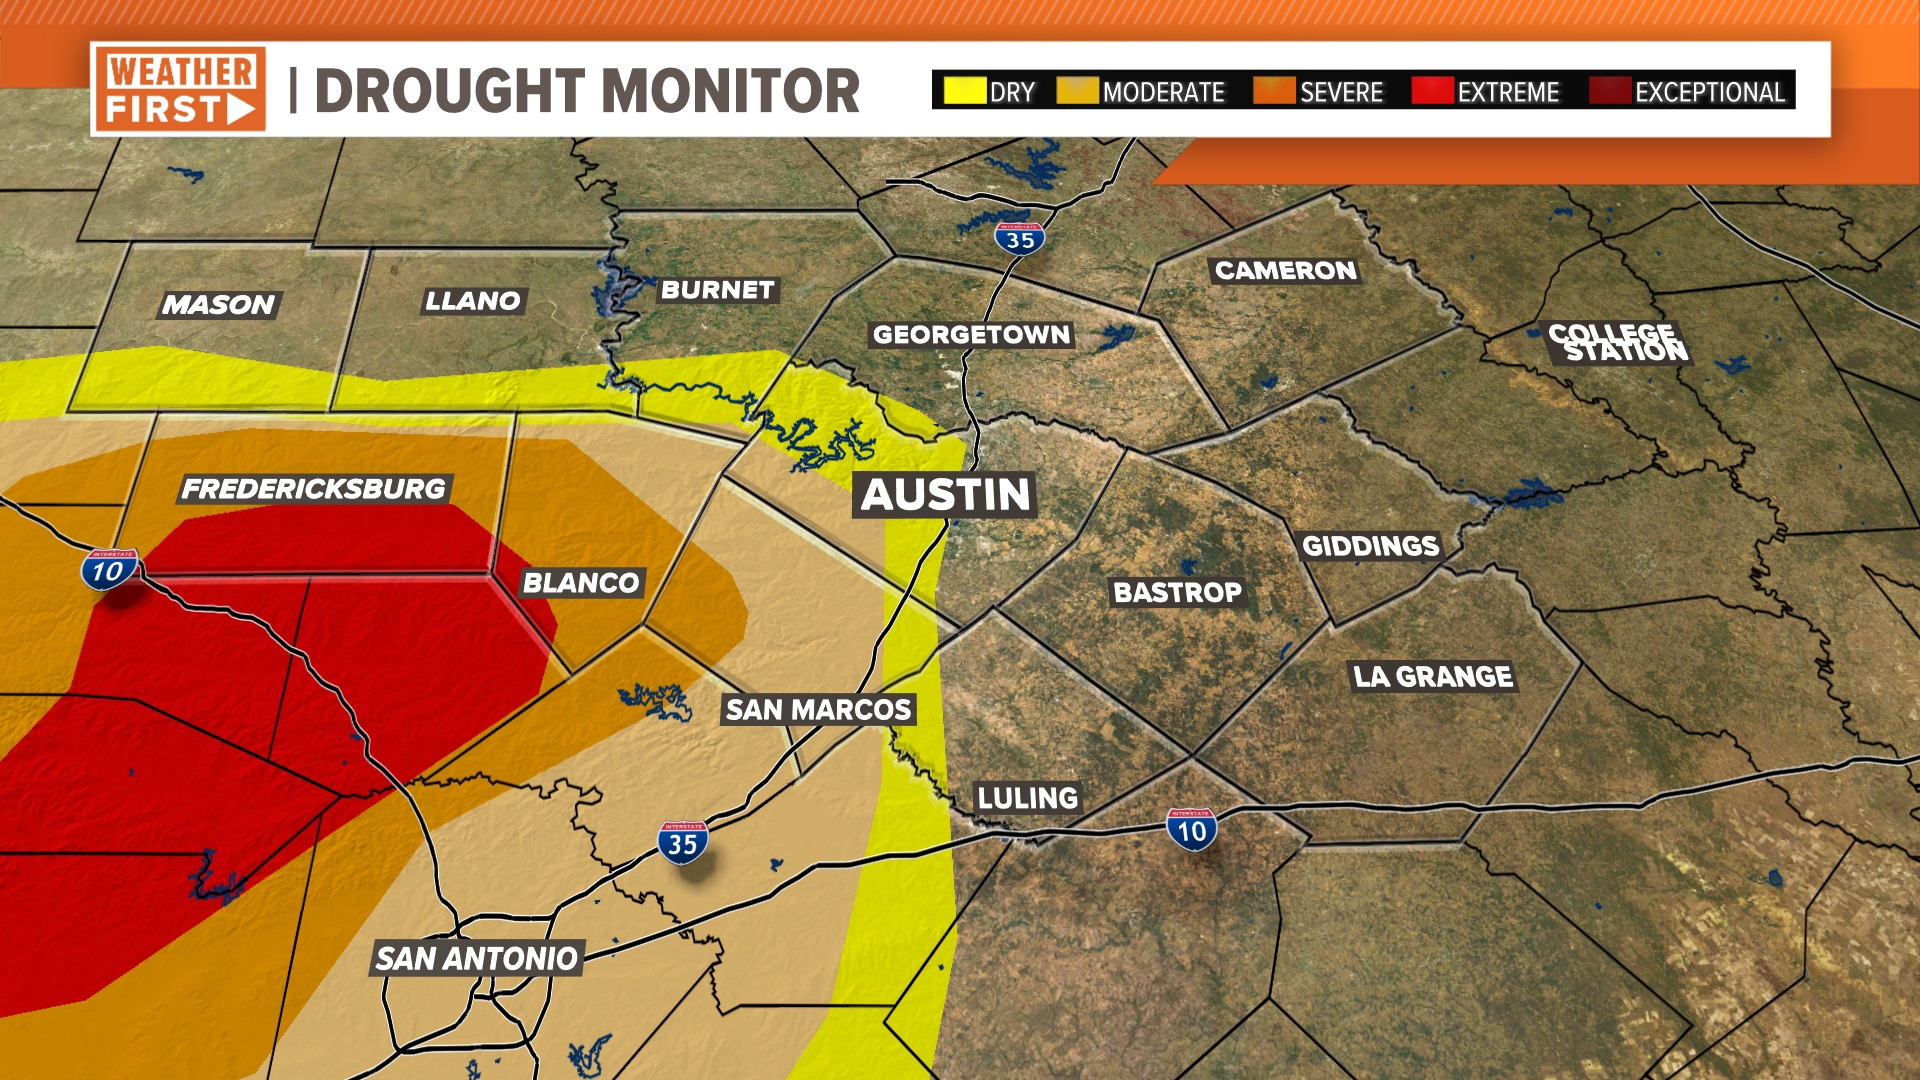 Tracking steadily improving drought conditions across Central Texas